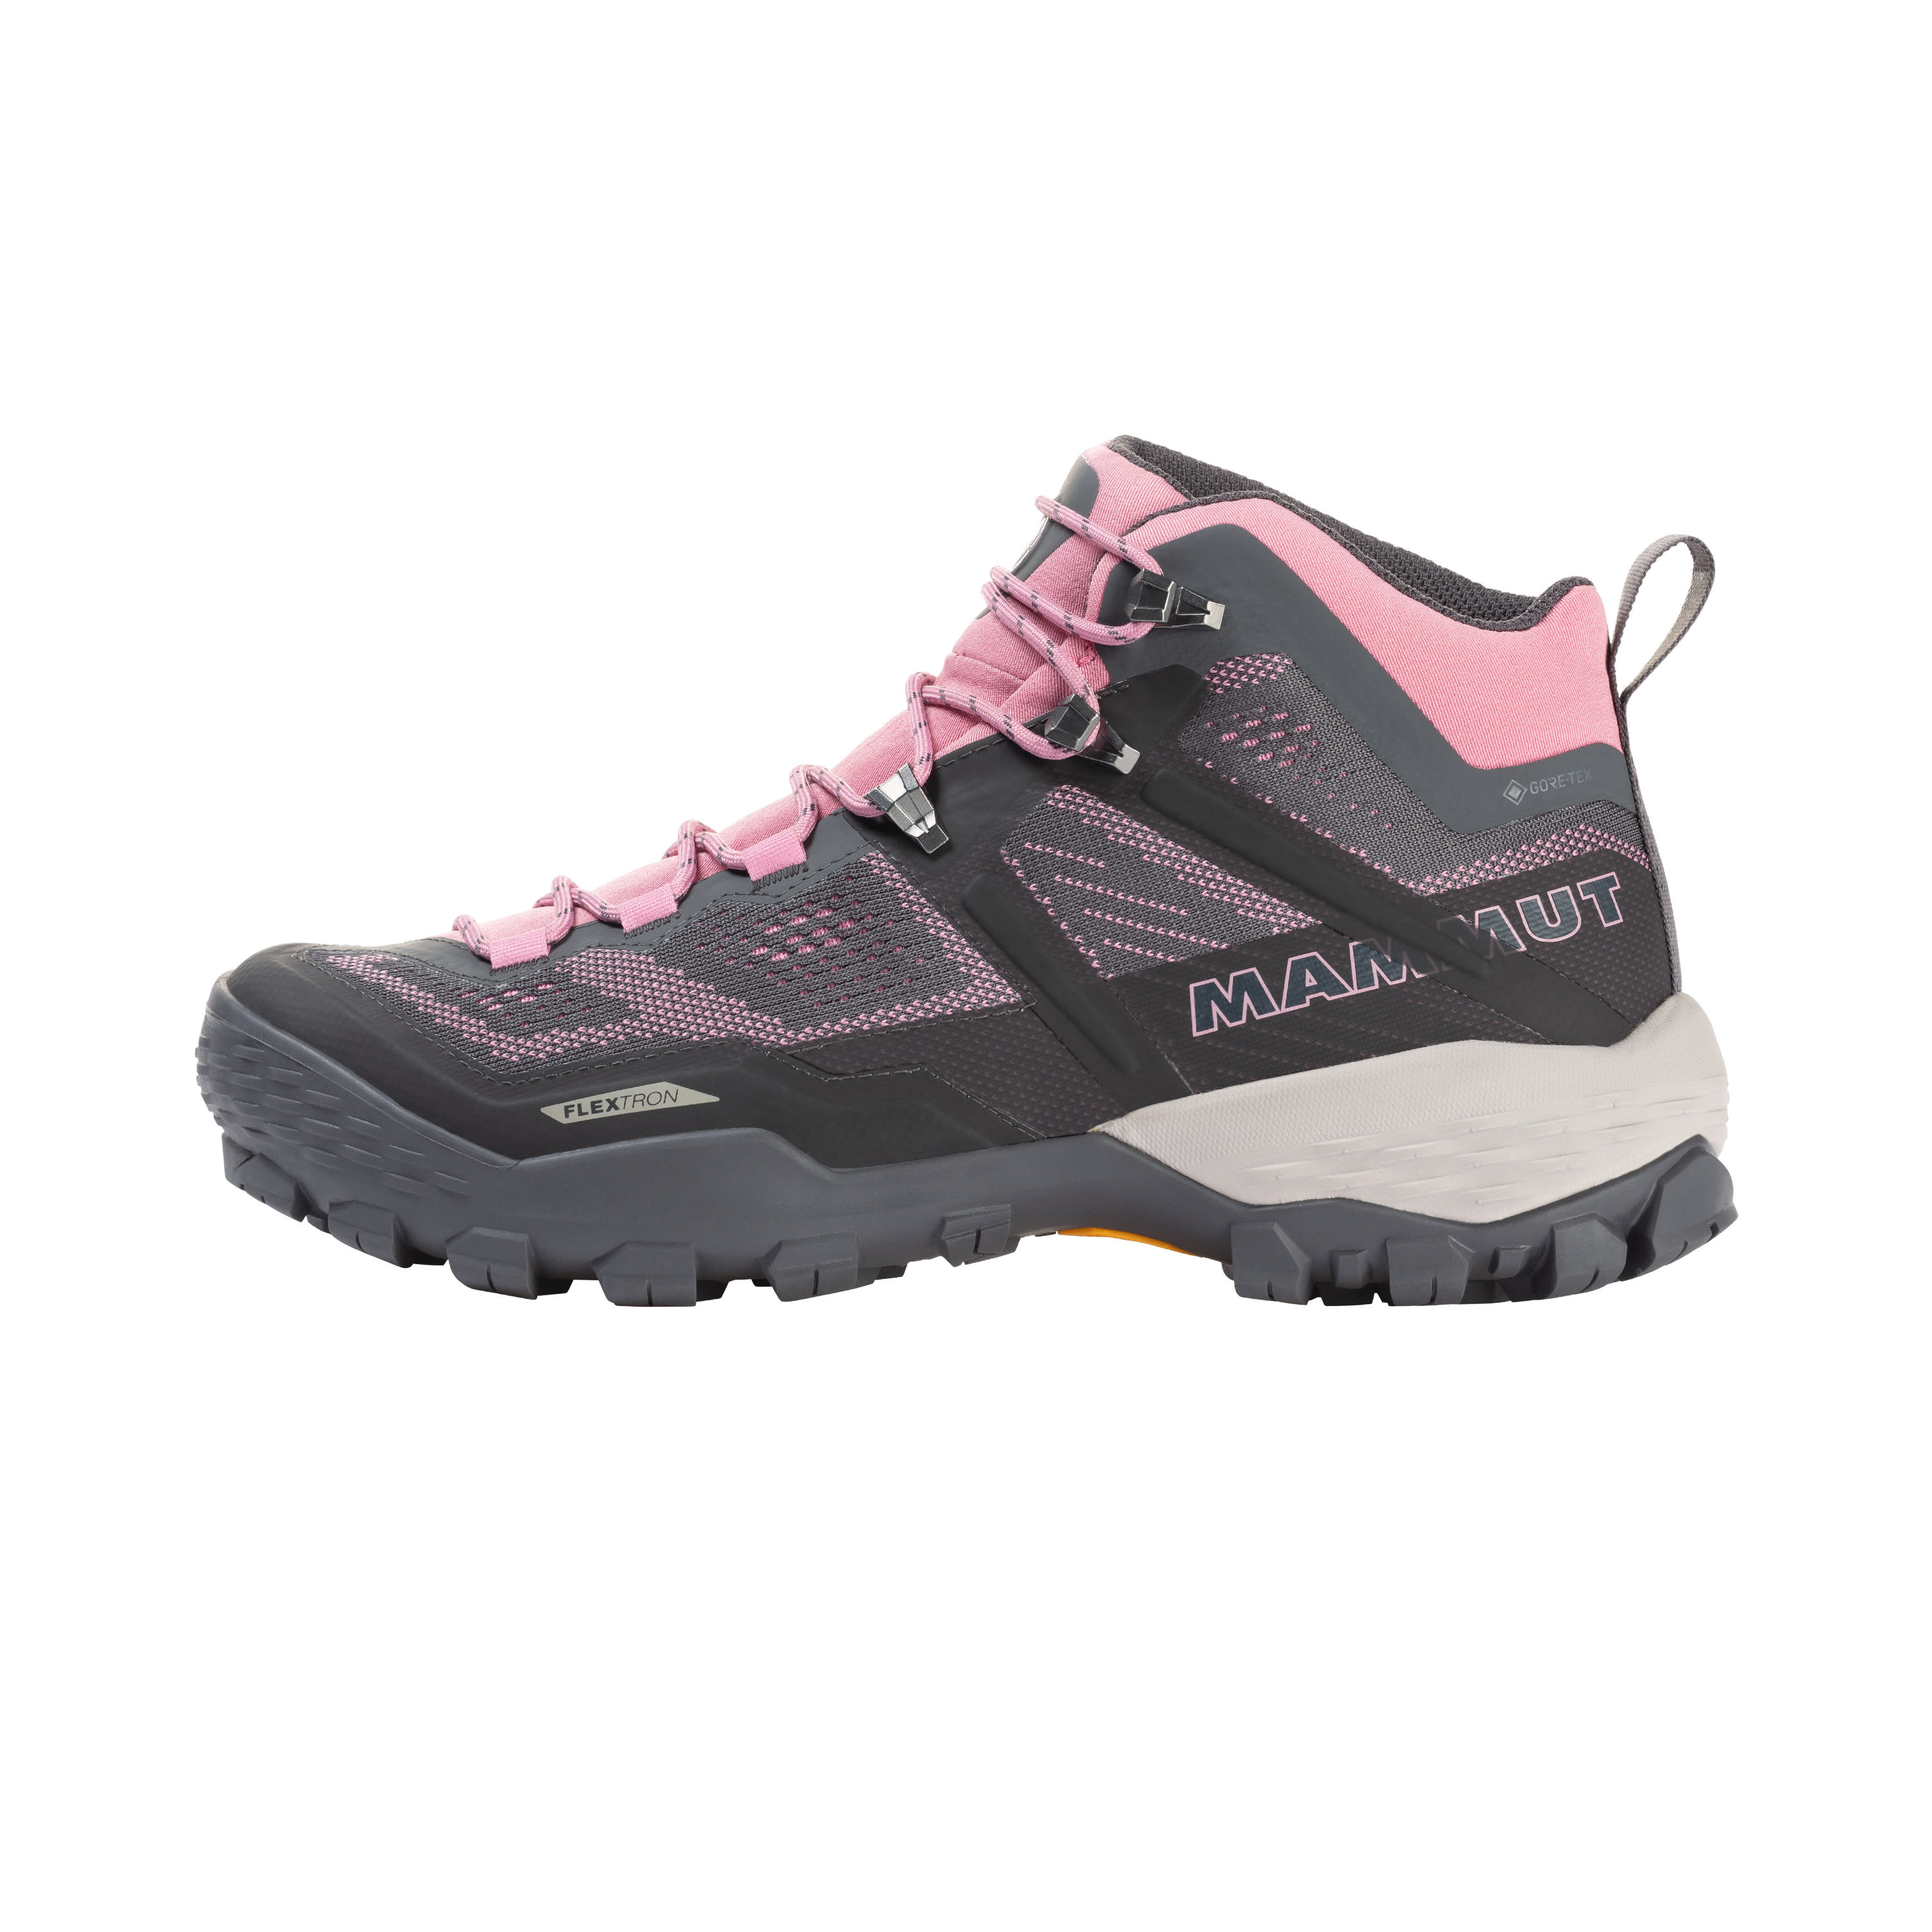 Buy Mammut Ducan Mid Gore-Tex Women's from Outnorth